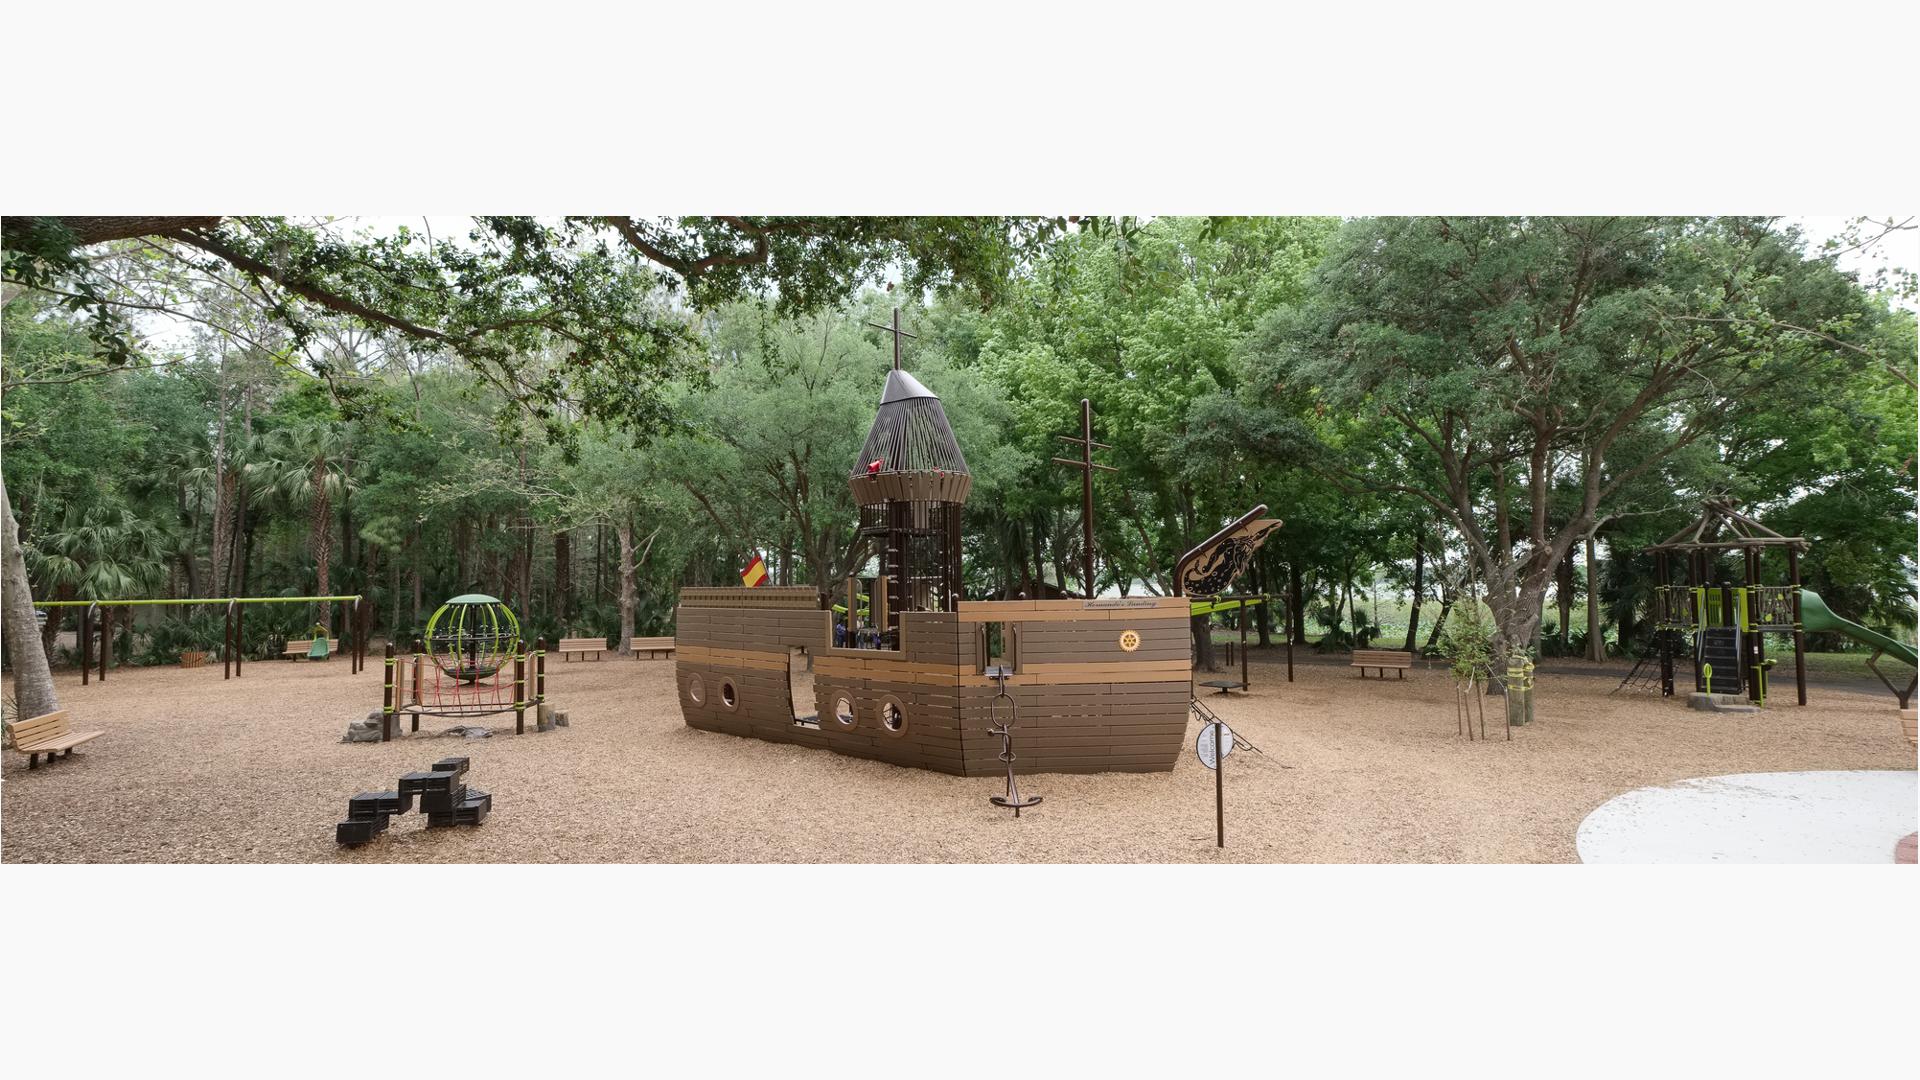 Lake Parker Park, Lakeland, FL which features a ship-themed playground design. Playground nets and other climbers. In addition, there are nature-inspired PlayBooster® and PlayShaper® play structures, Global Motion®, Rhapsody® Outdoor Musical Instruments, ZipKrooz® and swings.